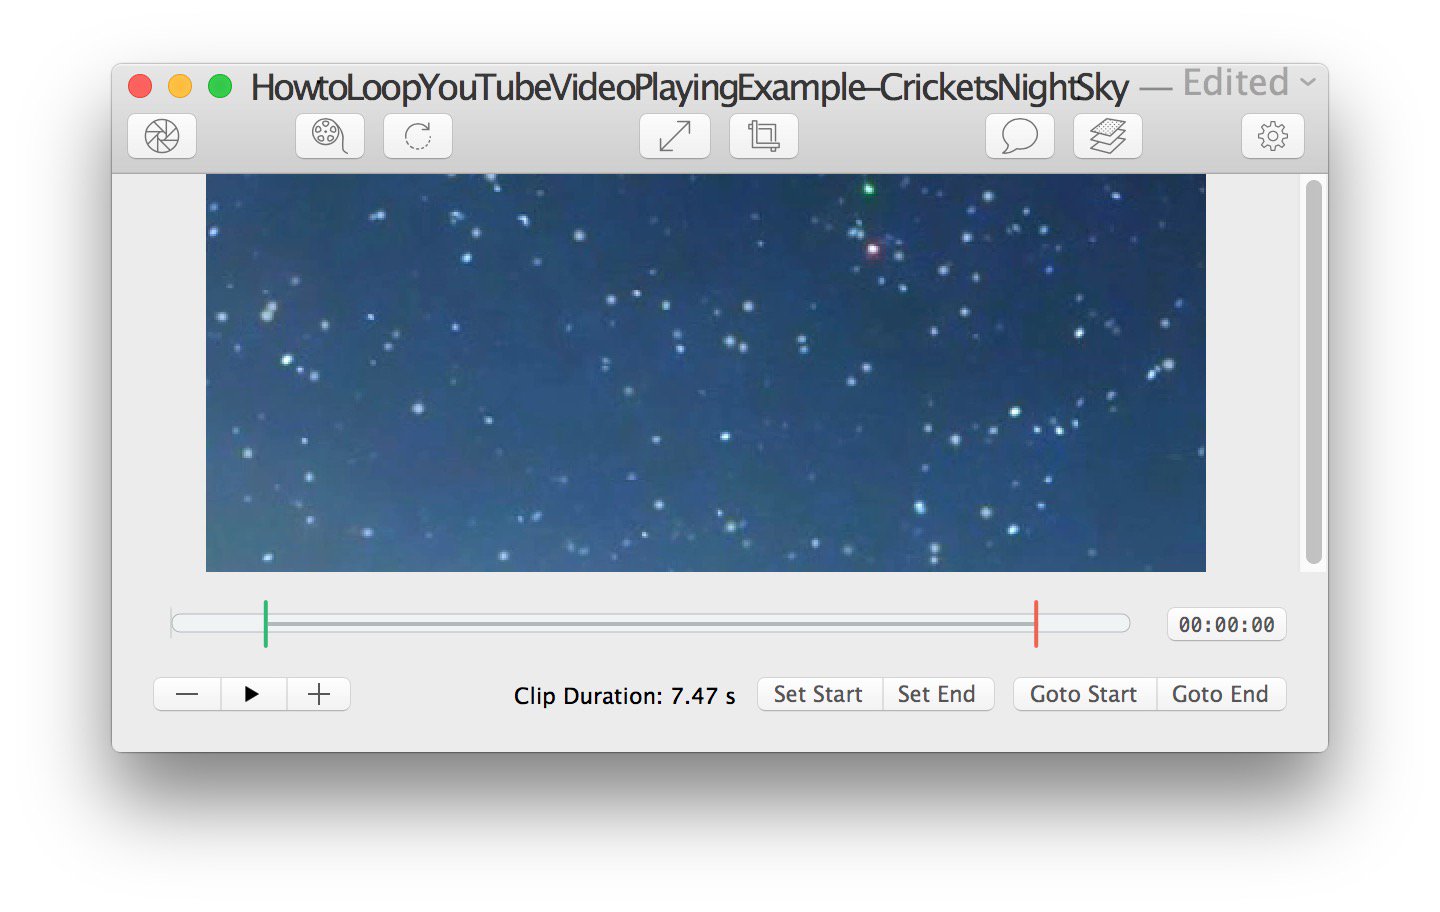 Convert Video to GIF on Mac with GifBrewery